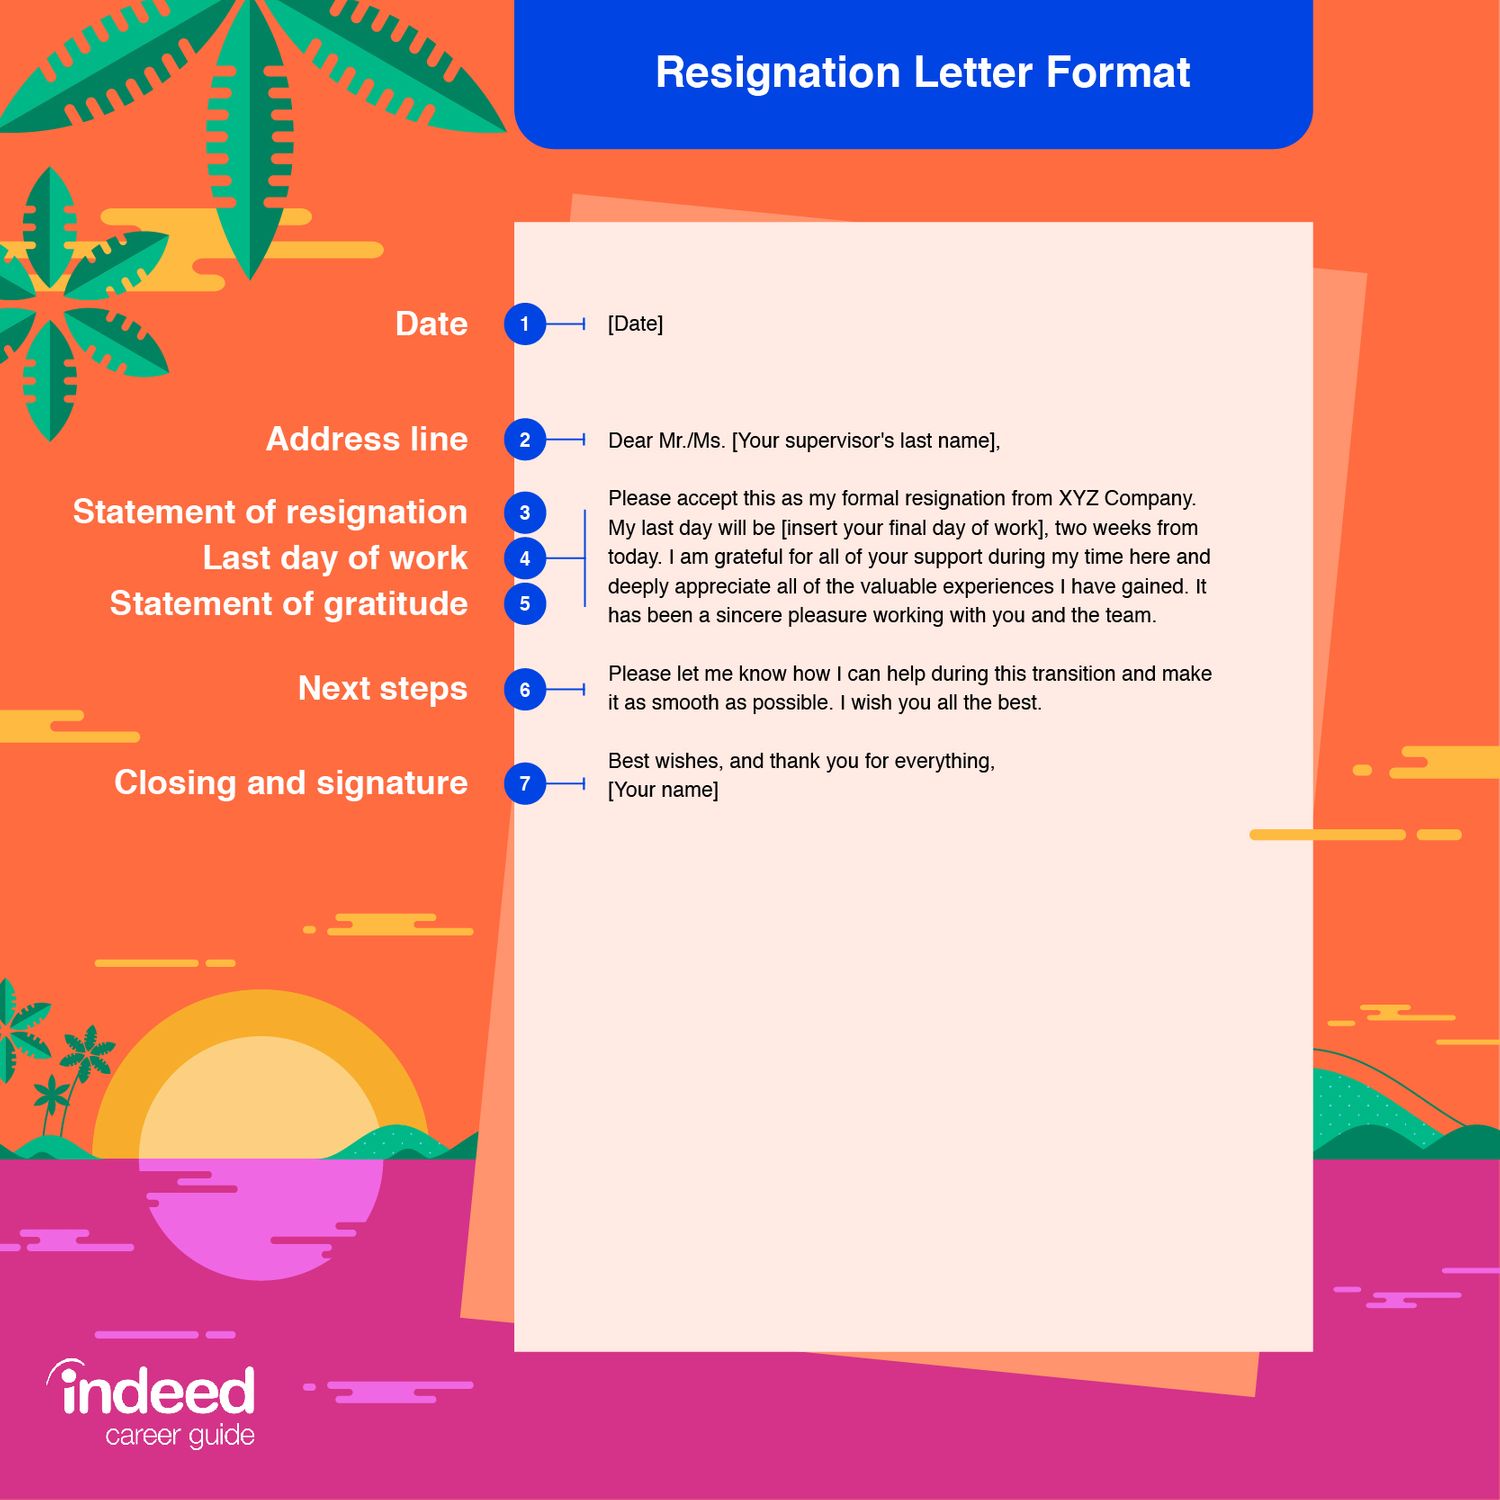 How To Write a Resignation Letter (With Samples and Tips)  Indeed.com